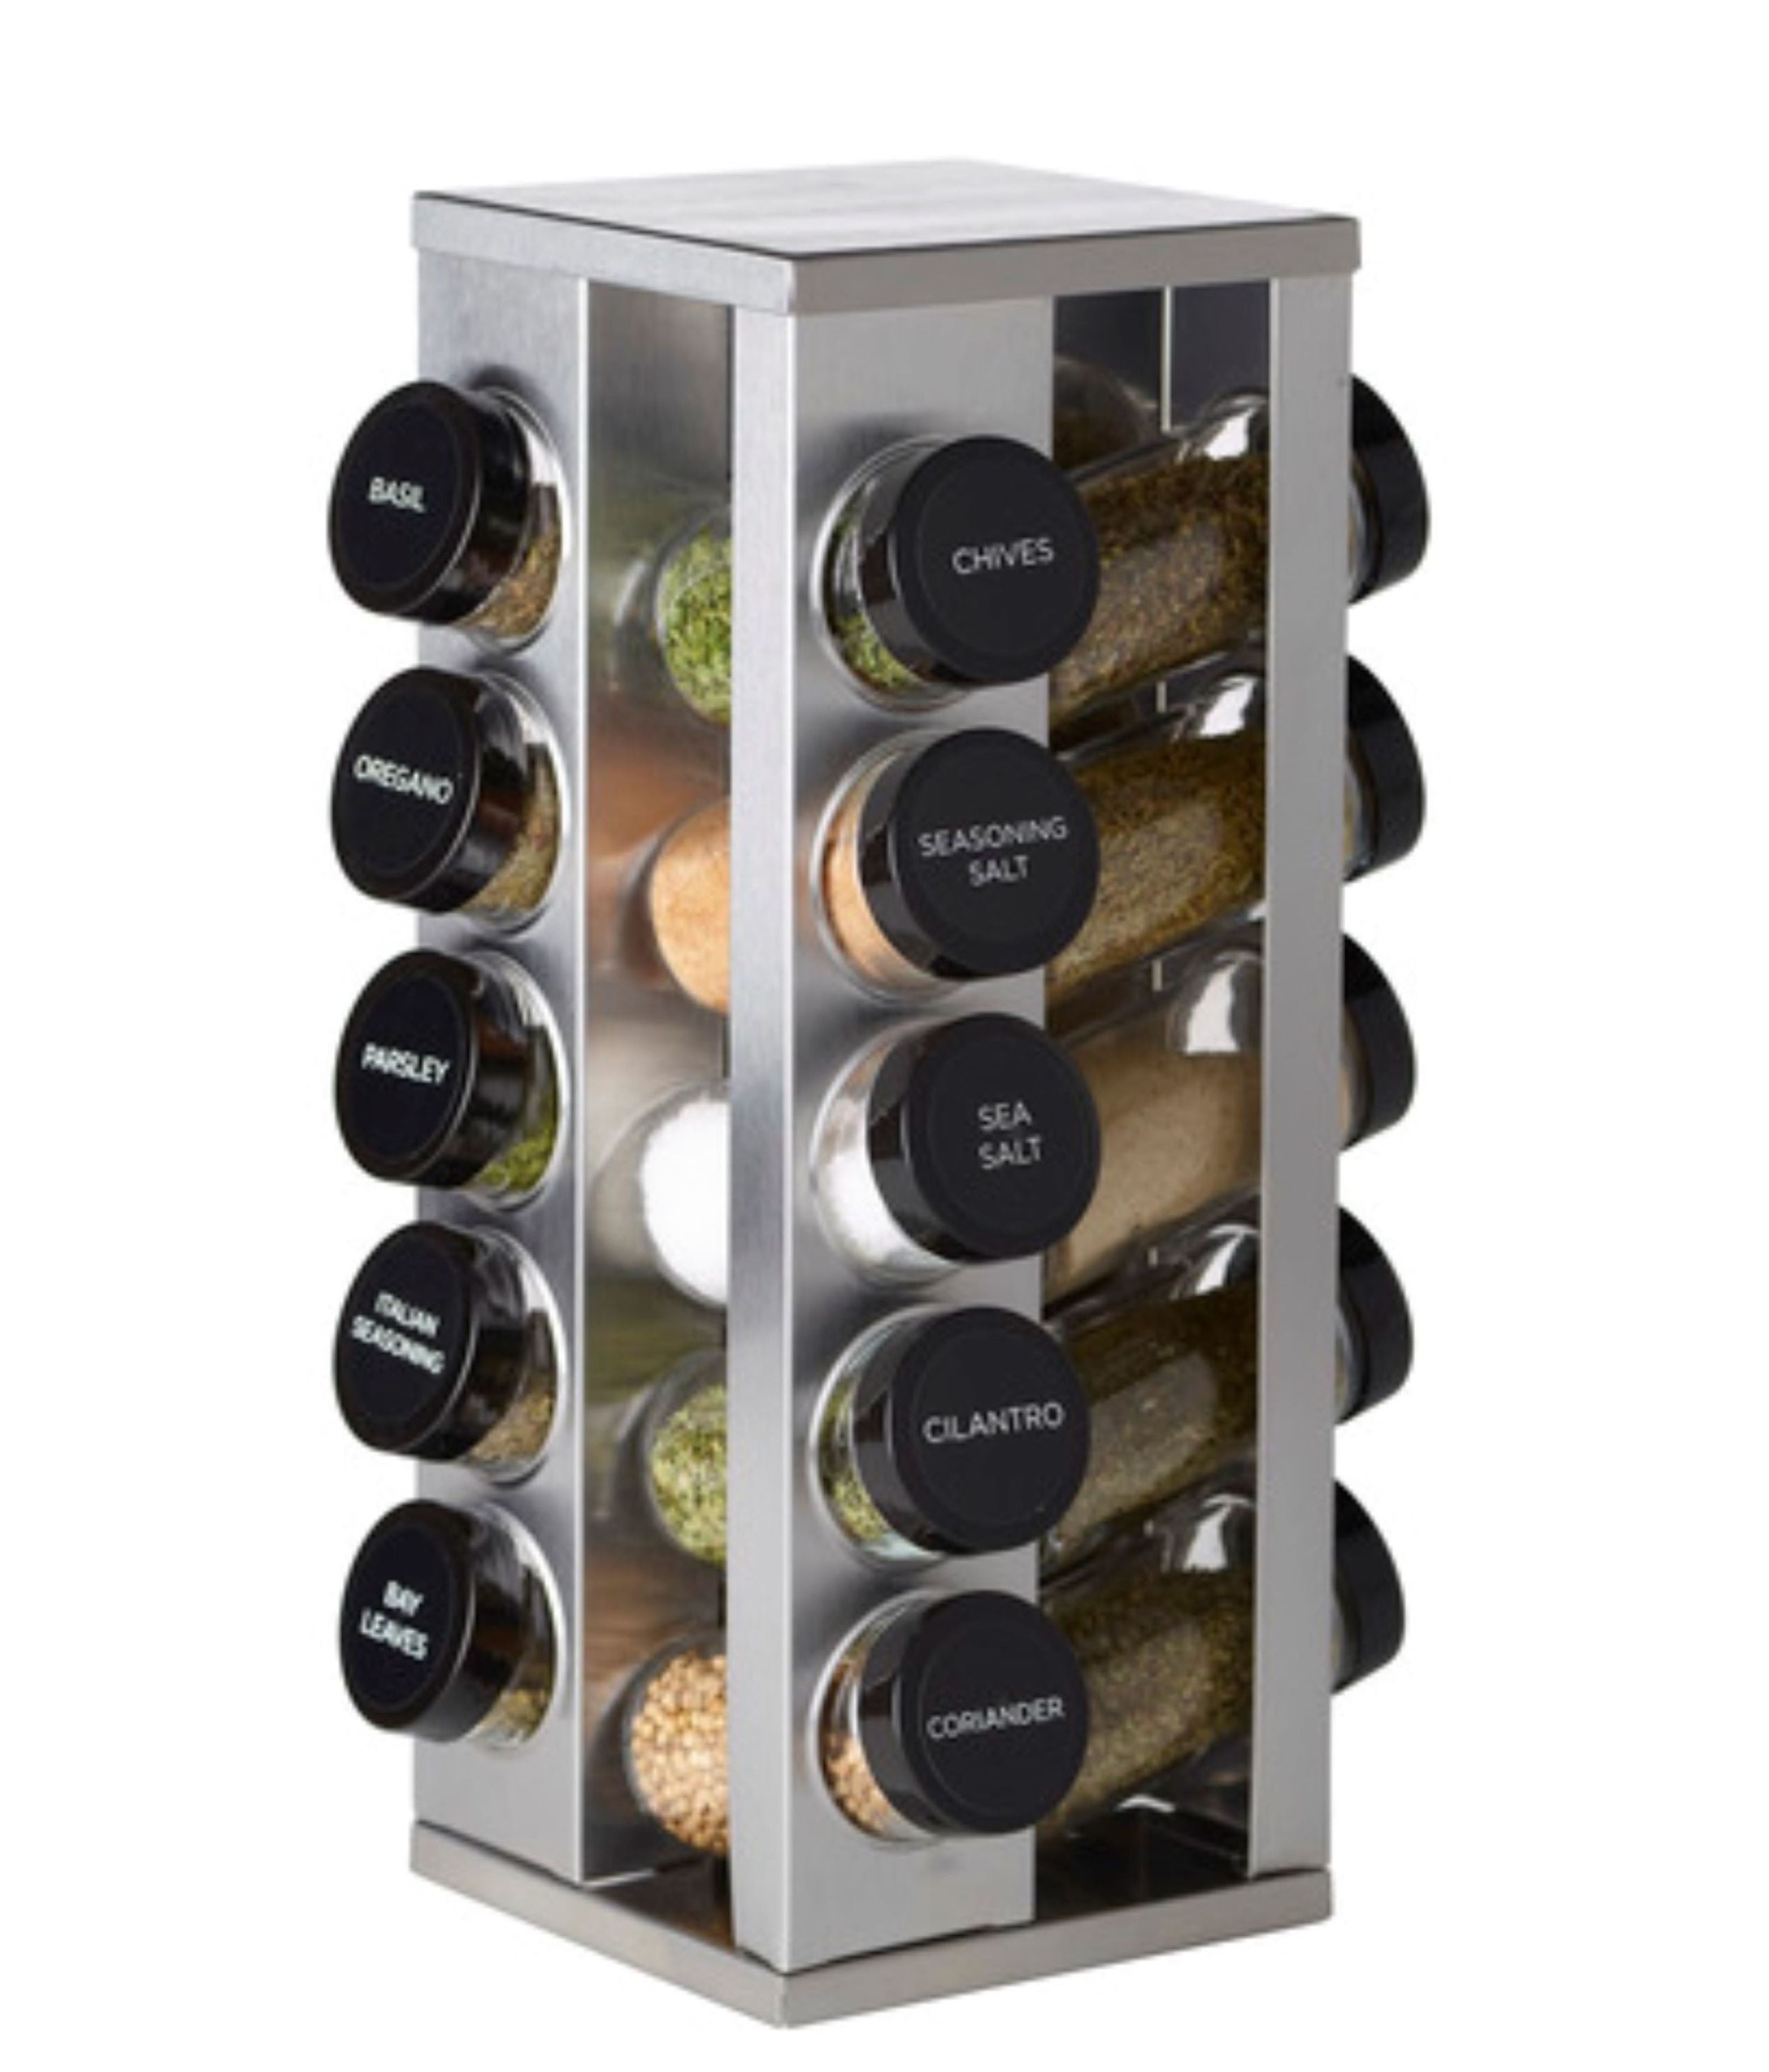 Orii 20 Jar Spice Rack with Spices Included - Tower Organizer for Kitchen  Spices and Seasonings, Free Spice Refills for 5 Years (Silver Black)